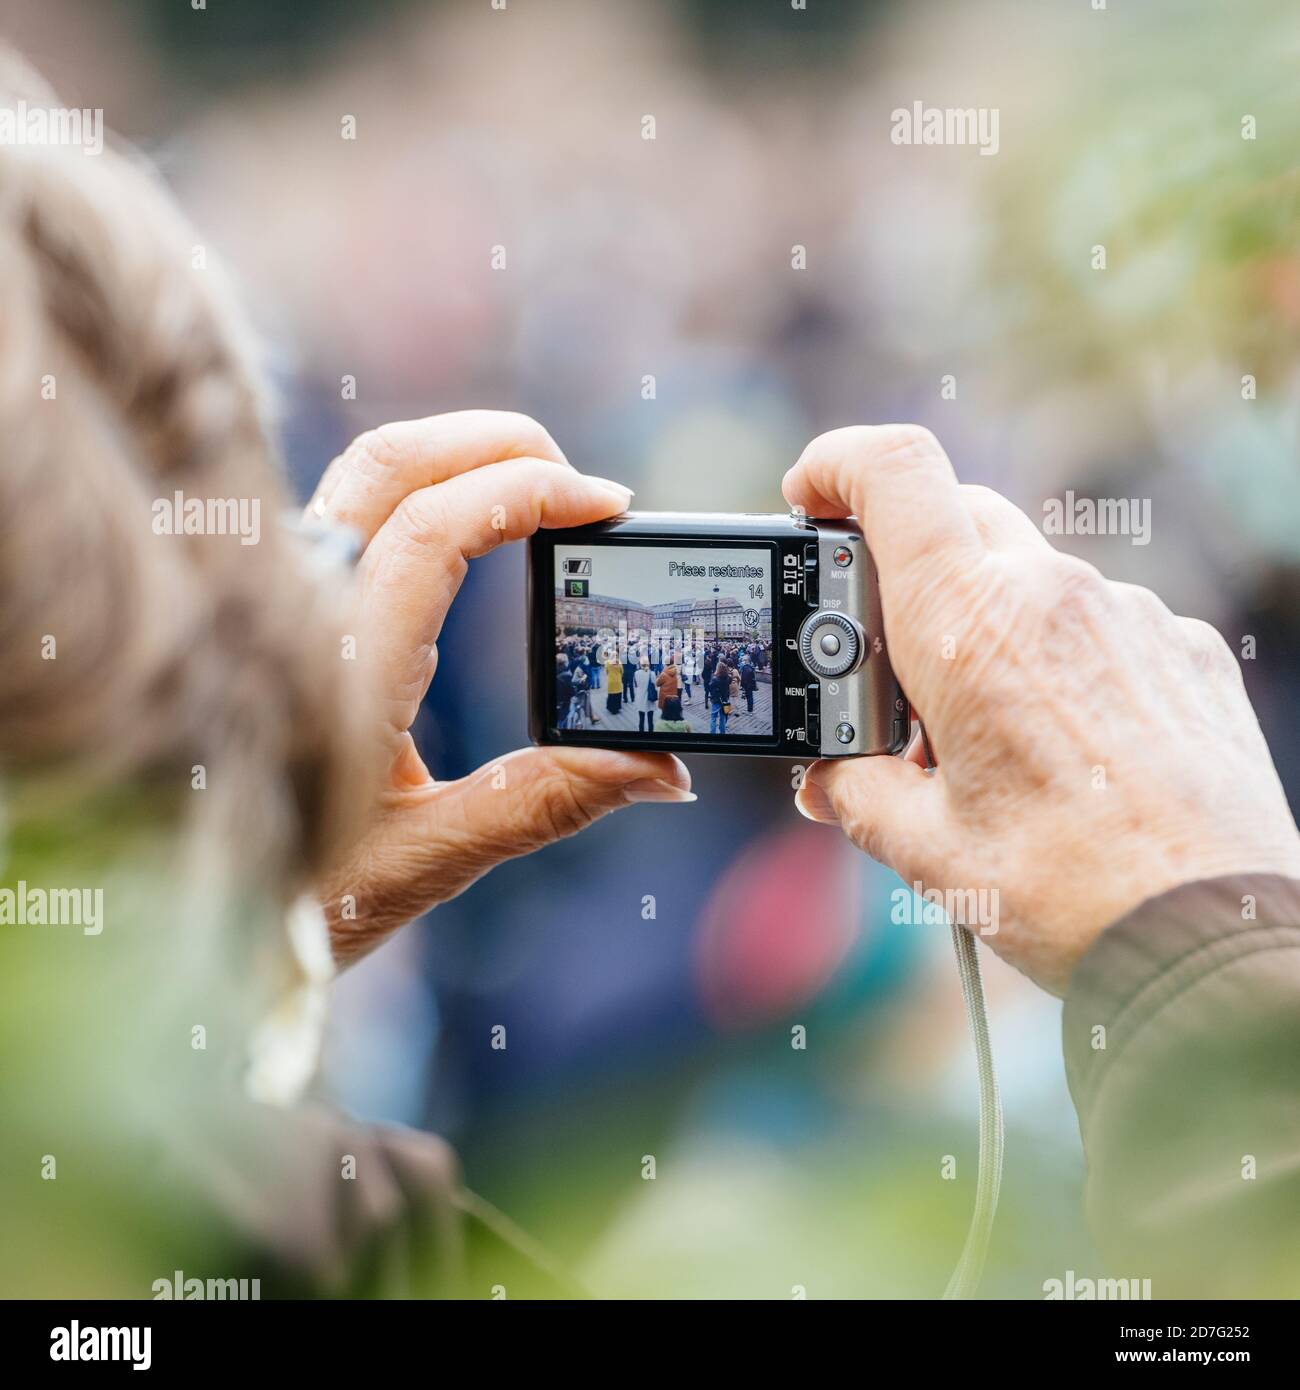 Strasbourg, France - Oct19, 2020: Square image senior taking photo of crowd after history teacher Samuel Paty, beheaded on Oct16th after showing caricatures of Prophet Muhammad in class Stock Photo